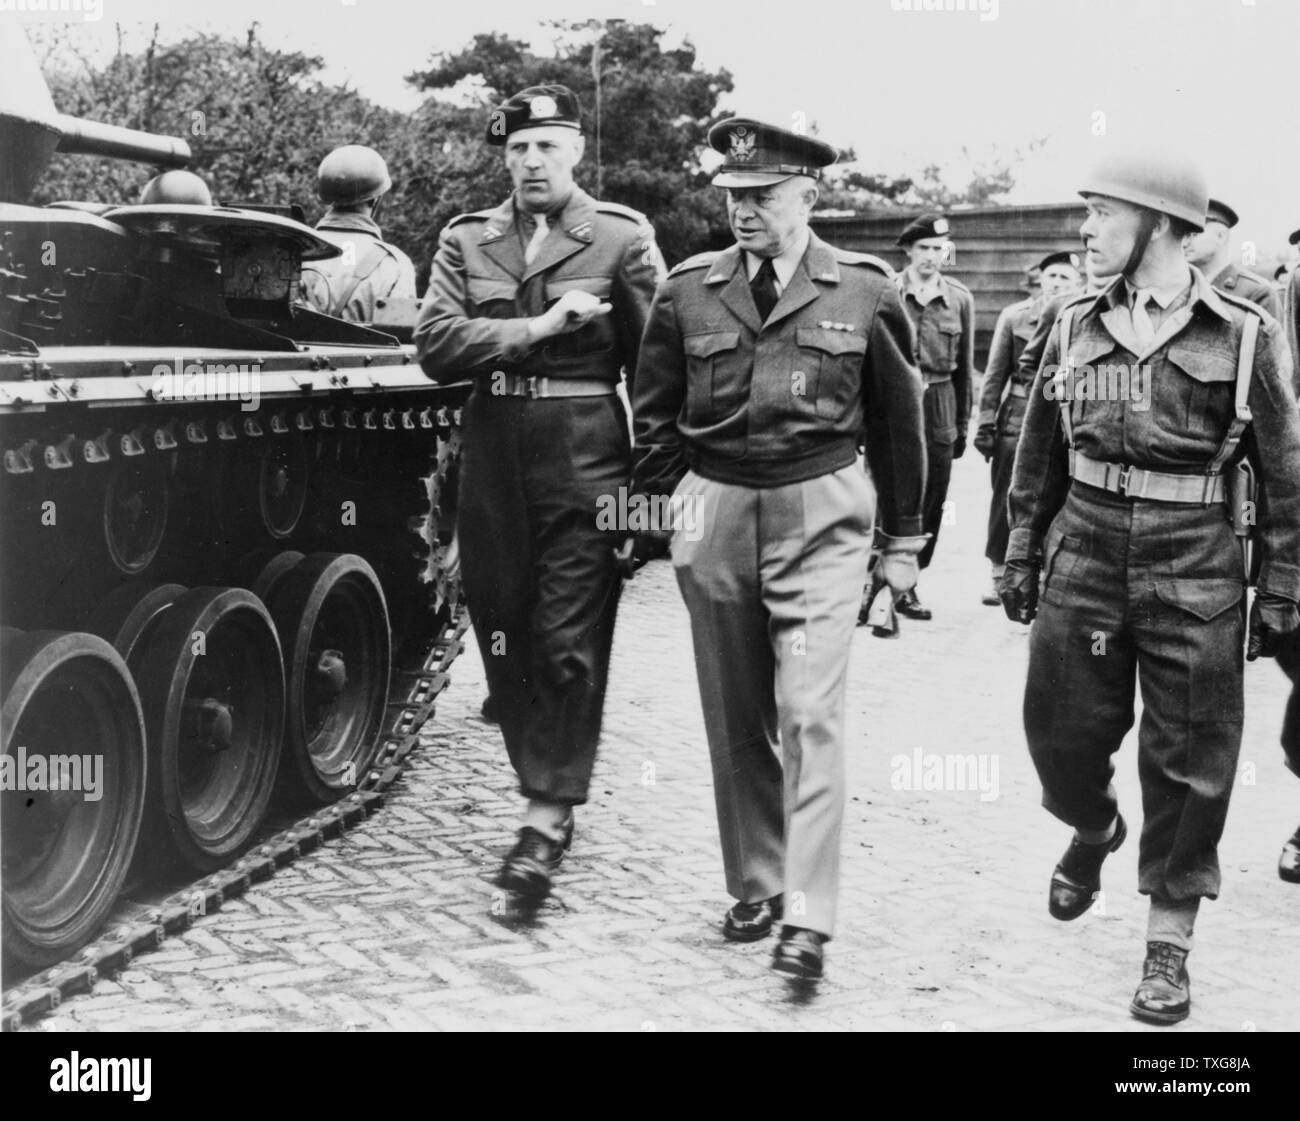 World War II - 1945 : US General Dwight Eisenhower inspecting troops. Chief of the Army, he became 34th President of the United States (1953-1961) Stock Photo